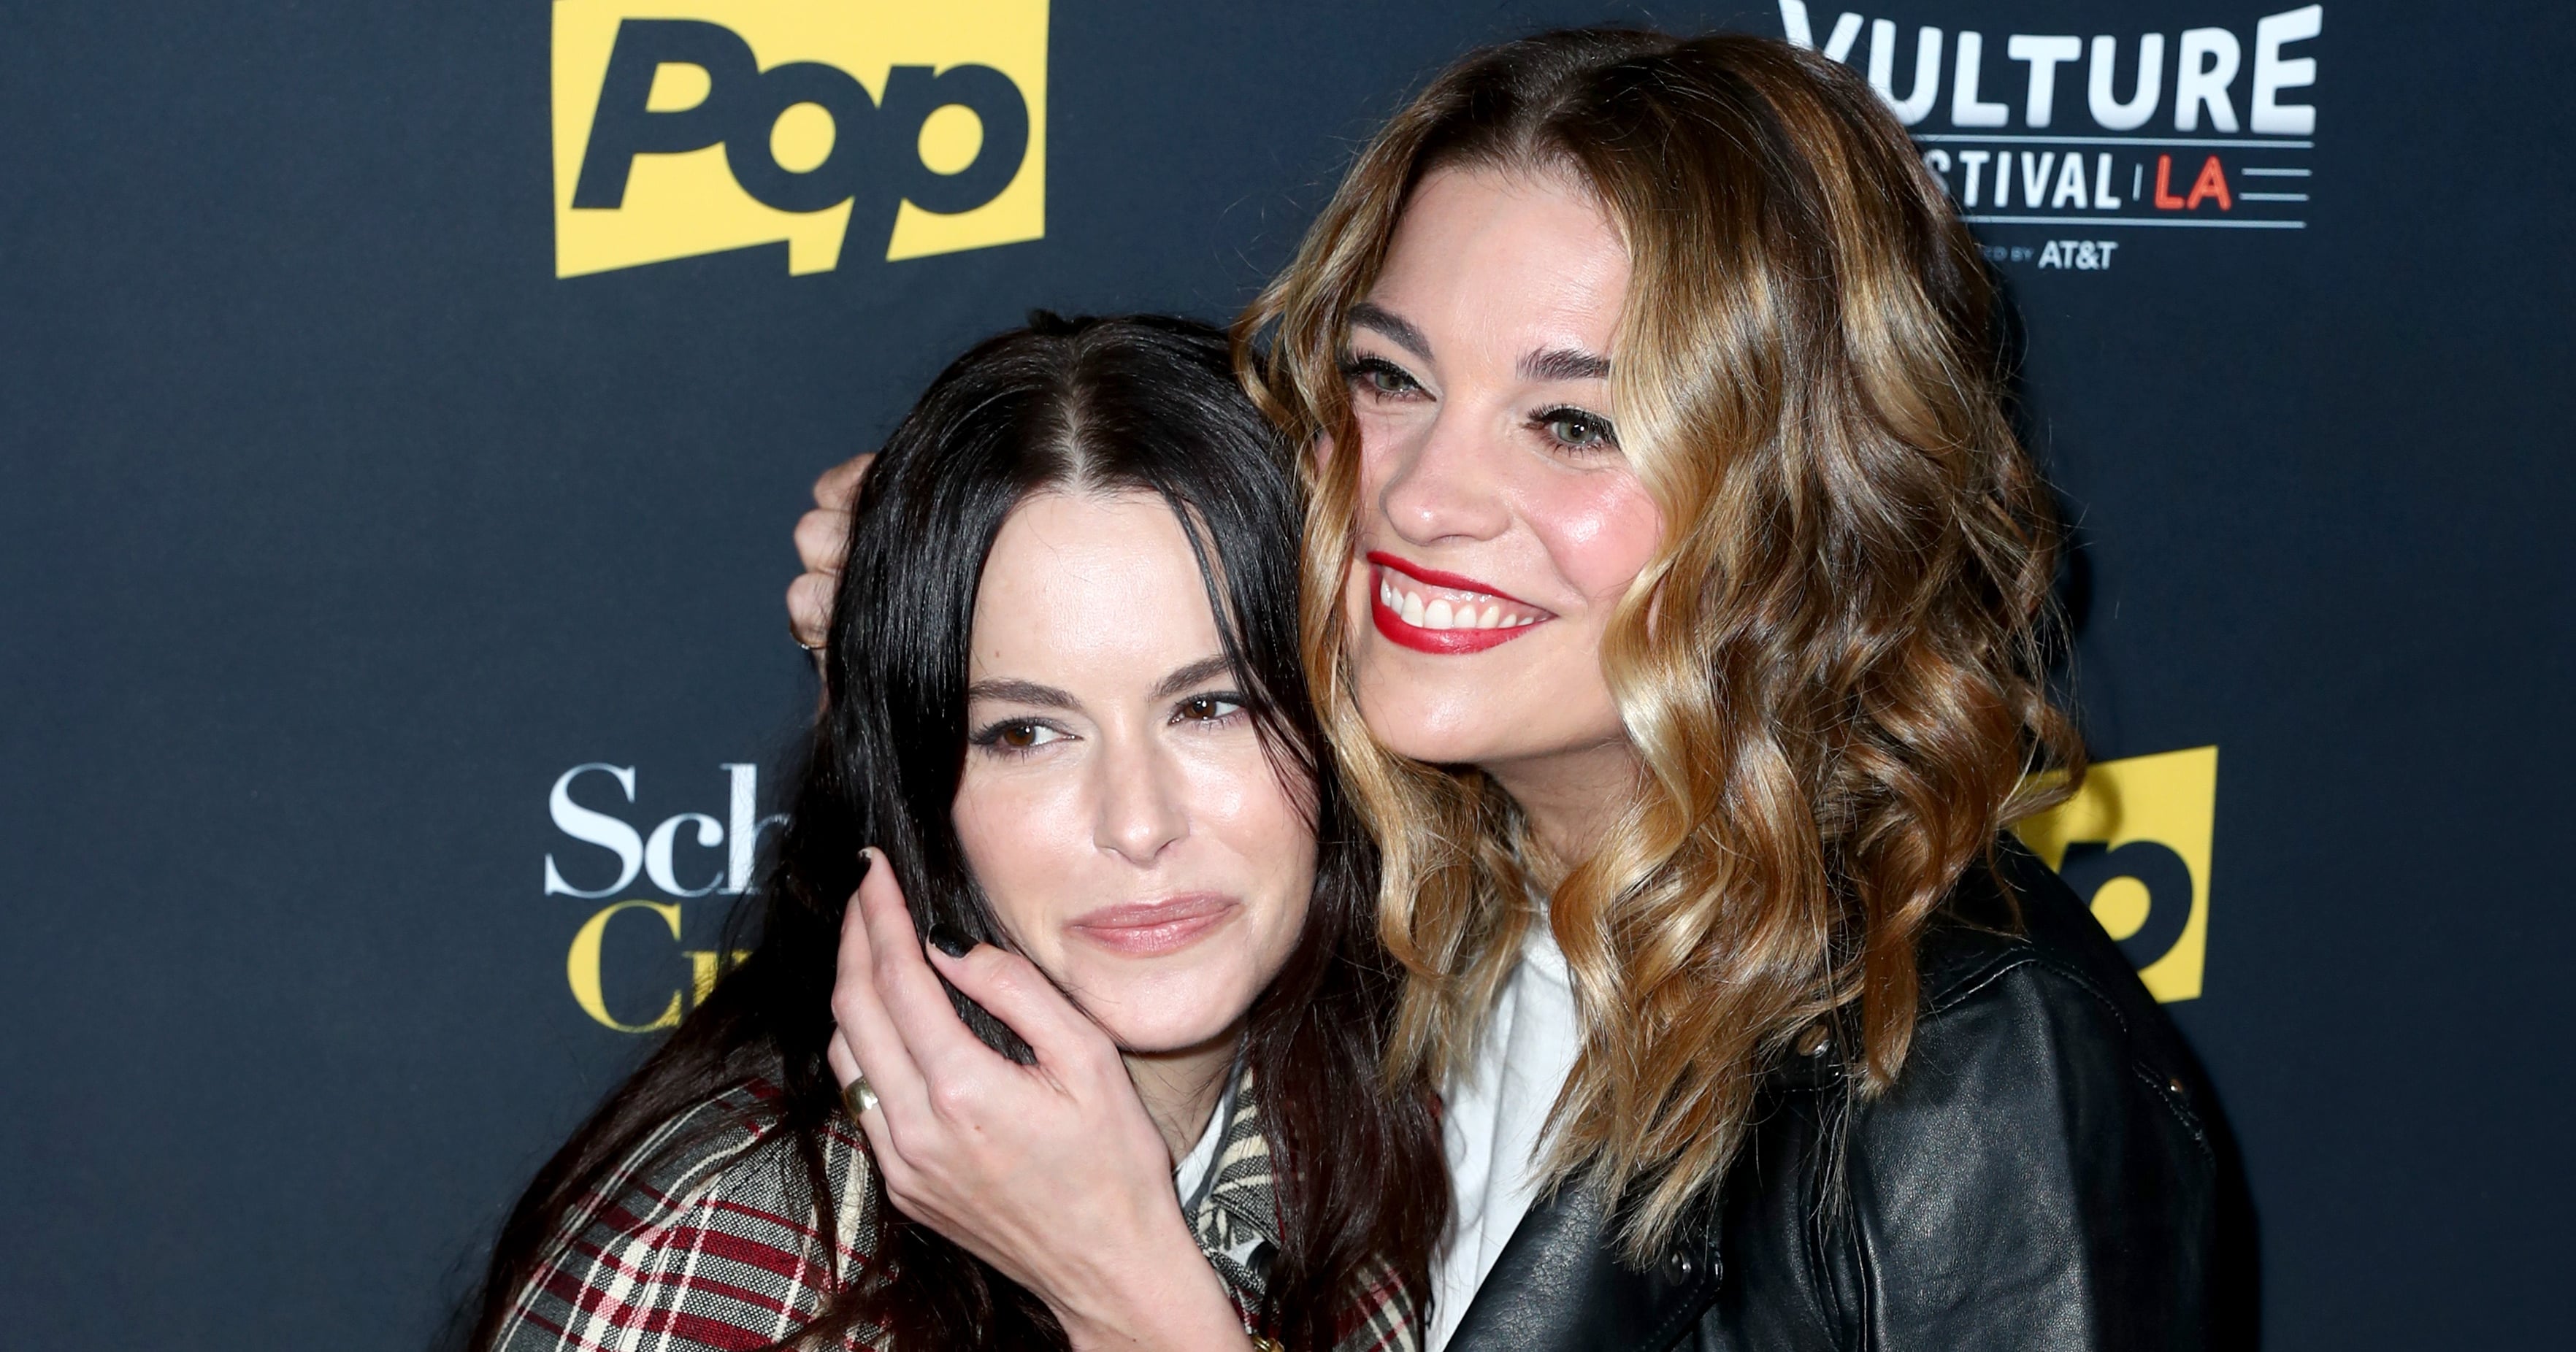 Annie Murphy and Emily Hampshire's Real-Life Friendship